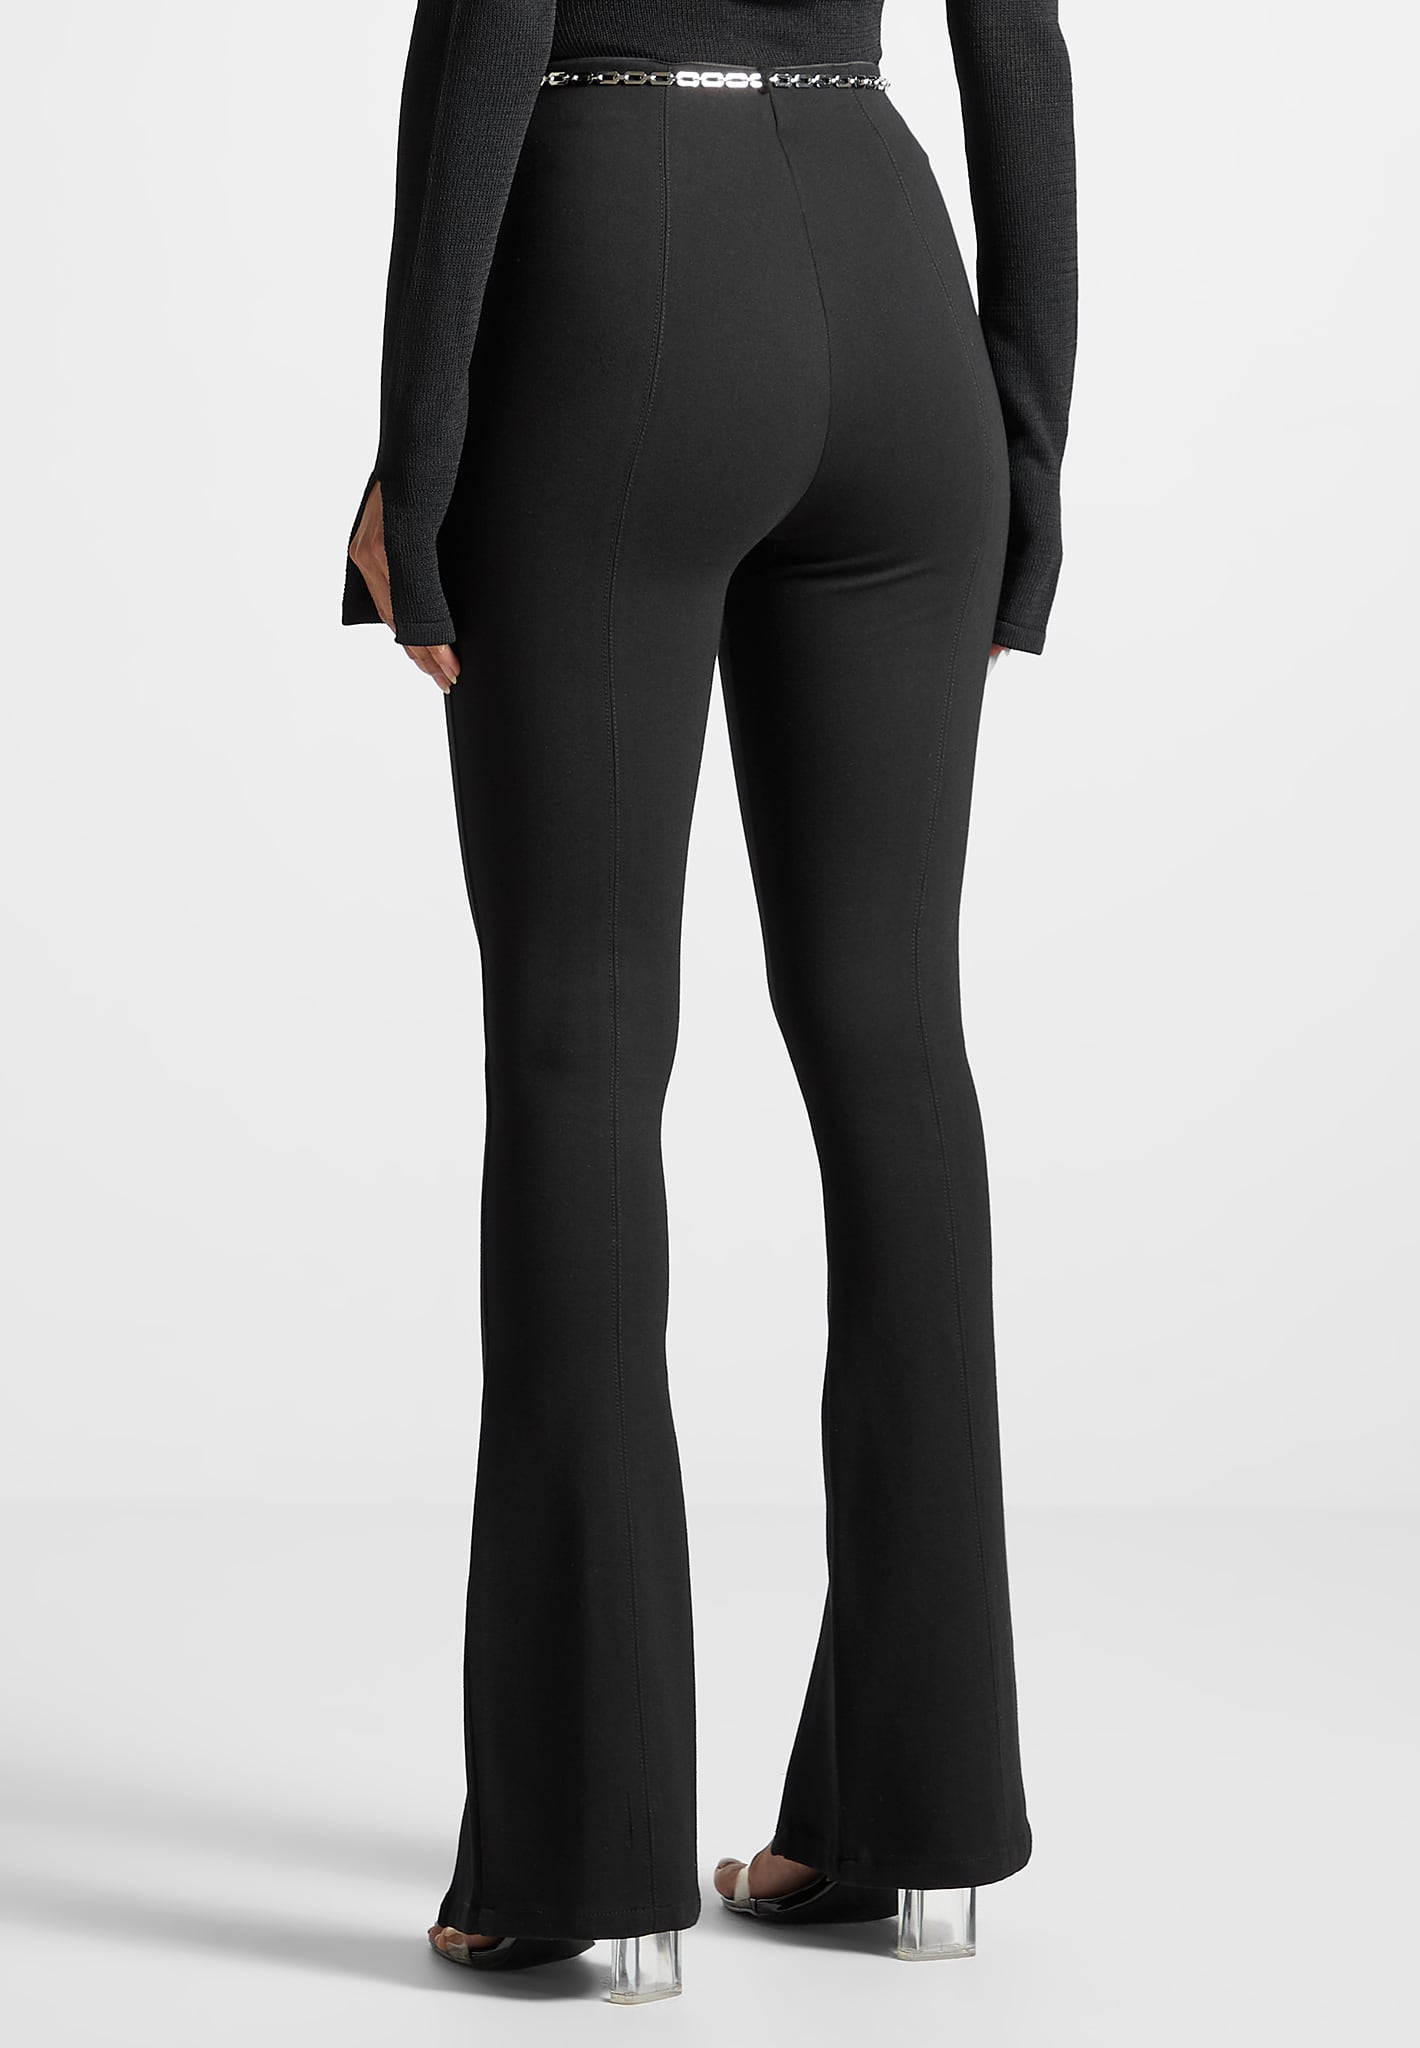 We11done Flared Style Trousers - Farfetch  Black flare pants, Flare  leggings, Black flares